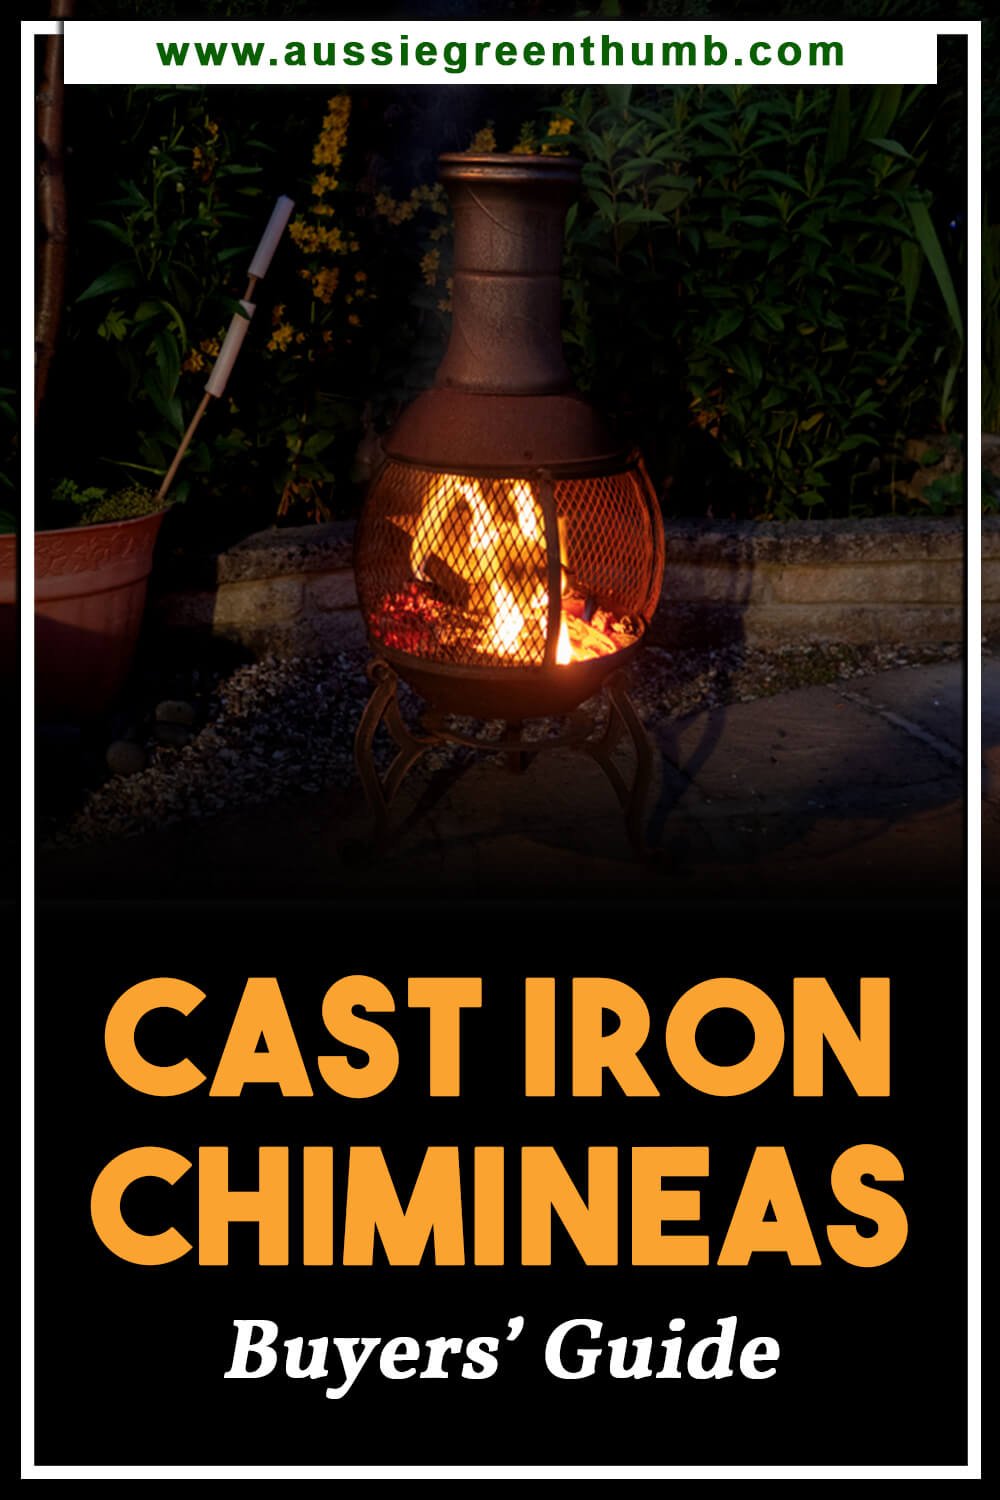 Best Cast Iron Chimineas Buyers’ Guide